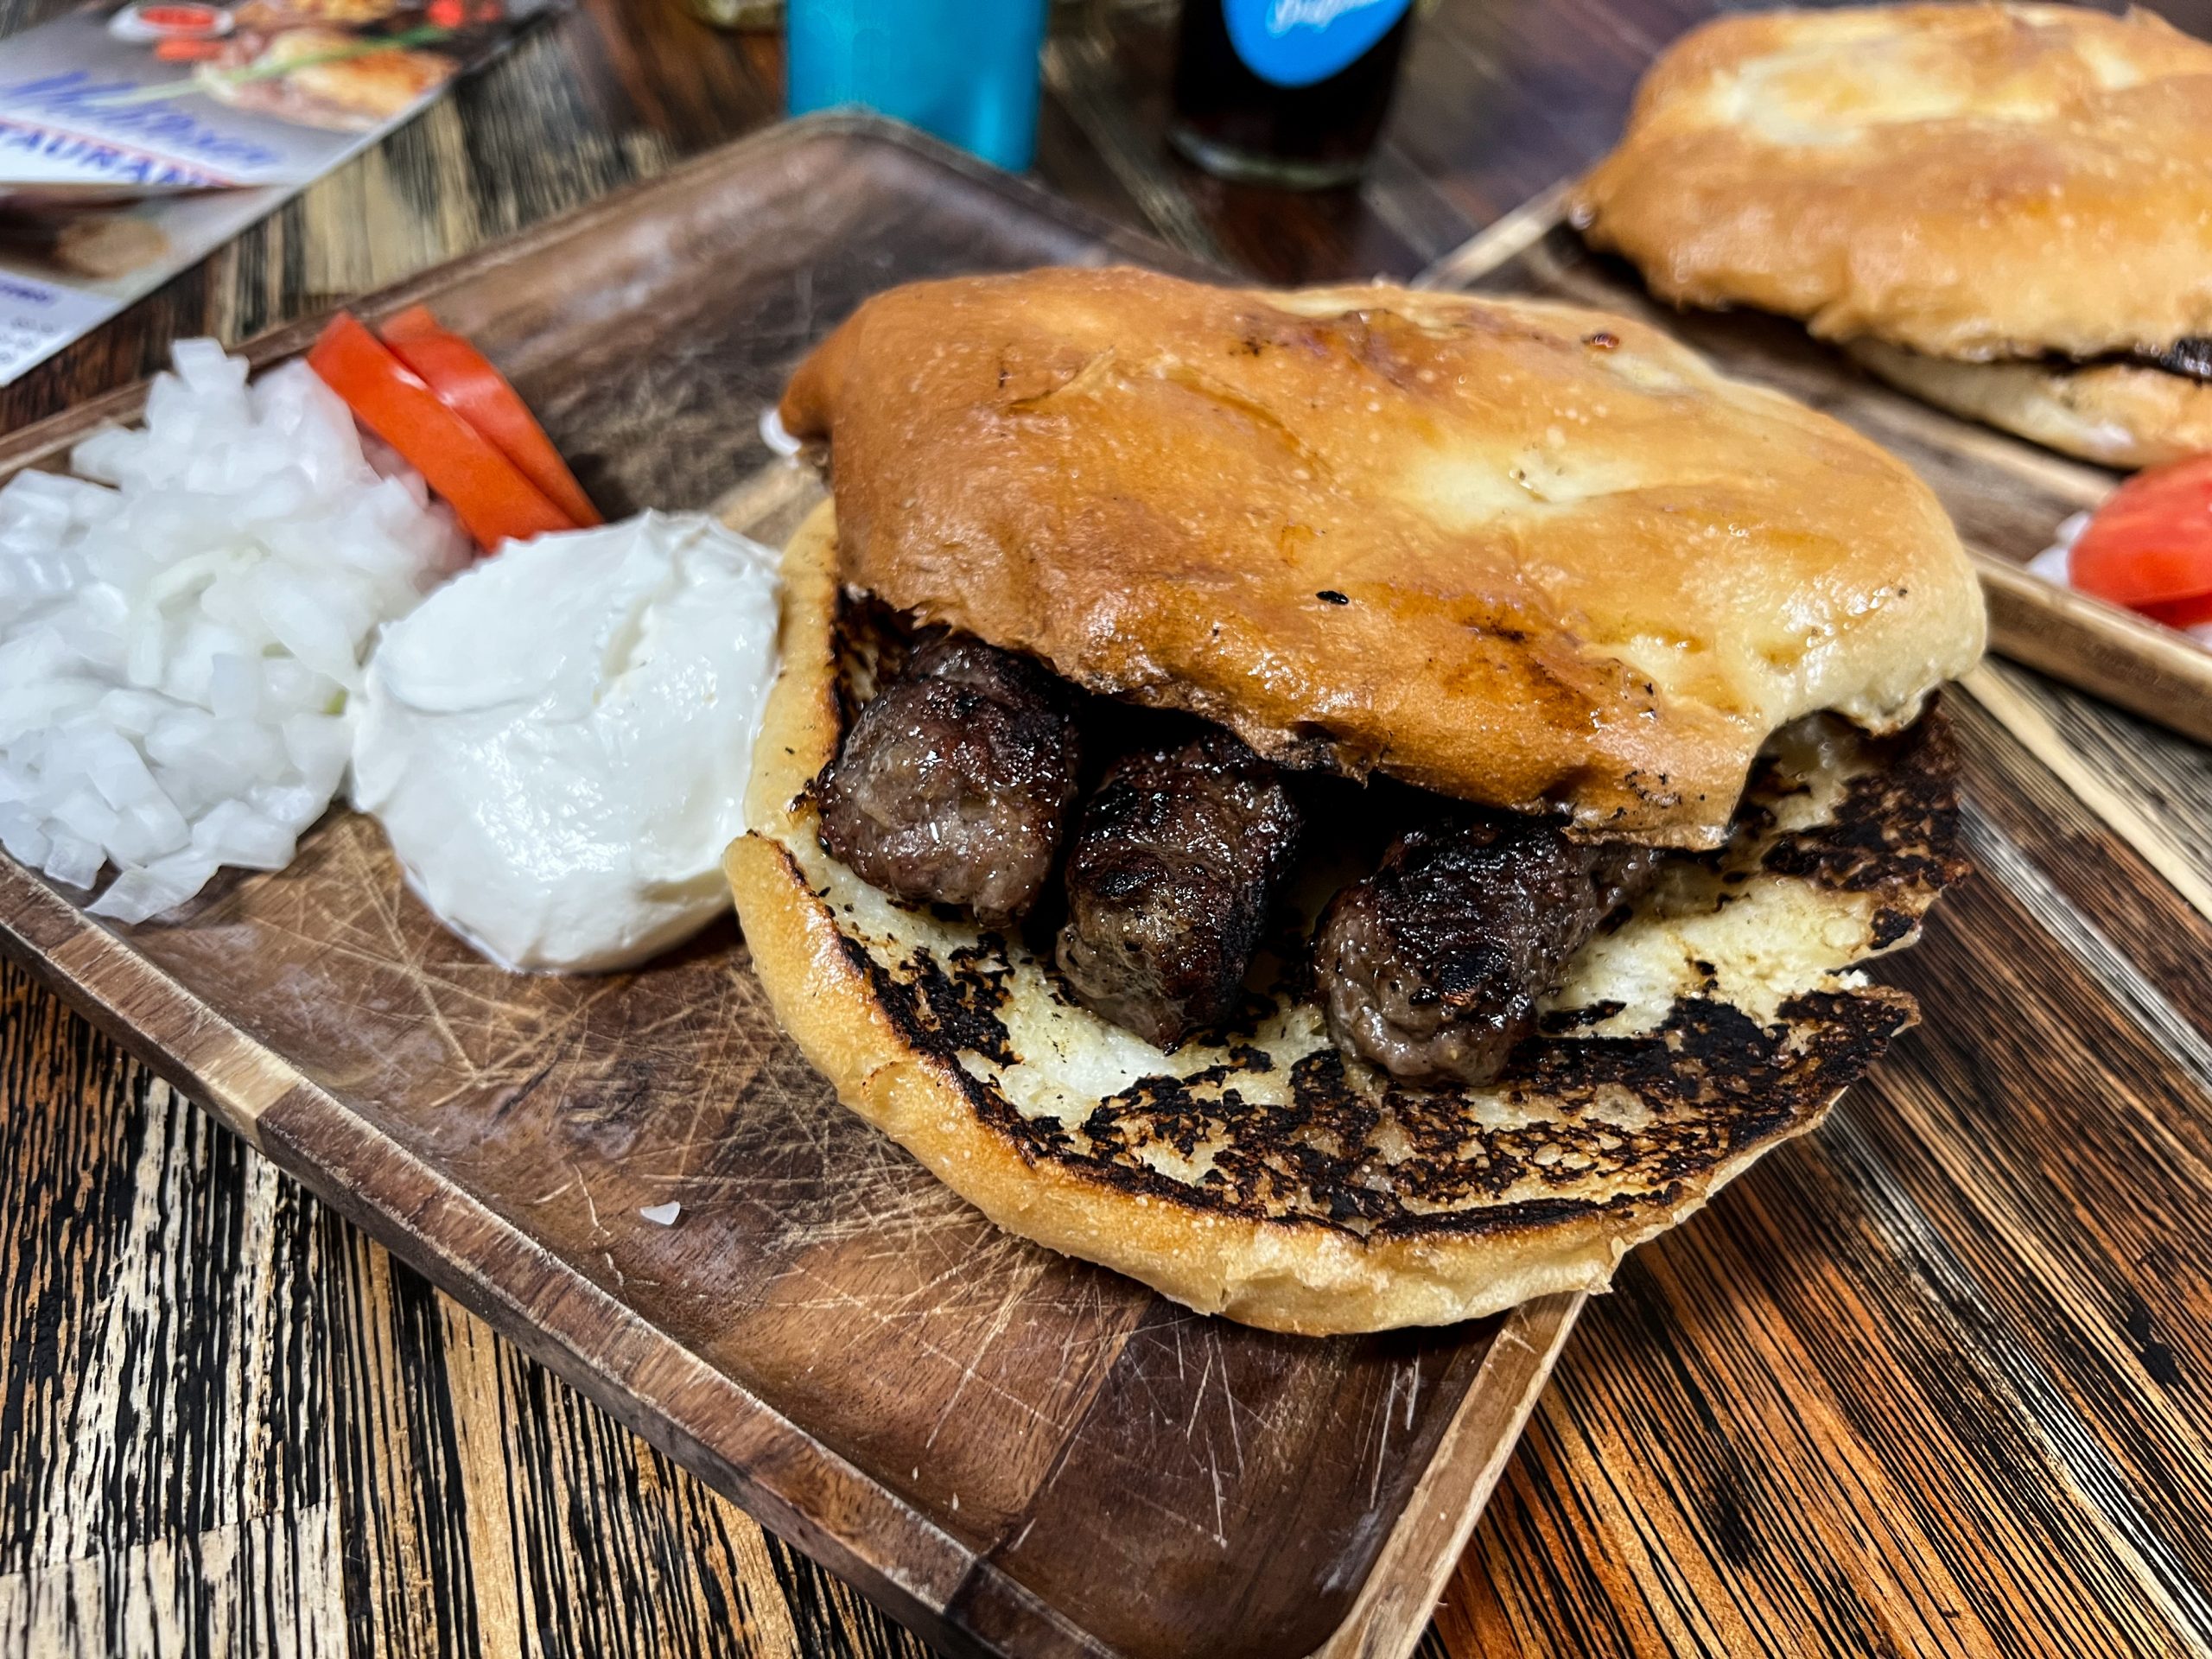 Up close and personal with a small order of the Cevapi - grilled dish of five minced beef links seved on traditional pita bread, generally found in the countries of Southeastern Europe